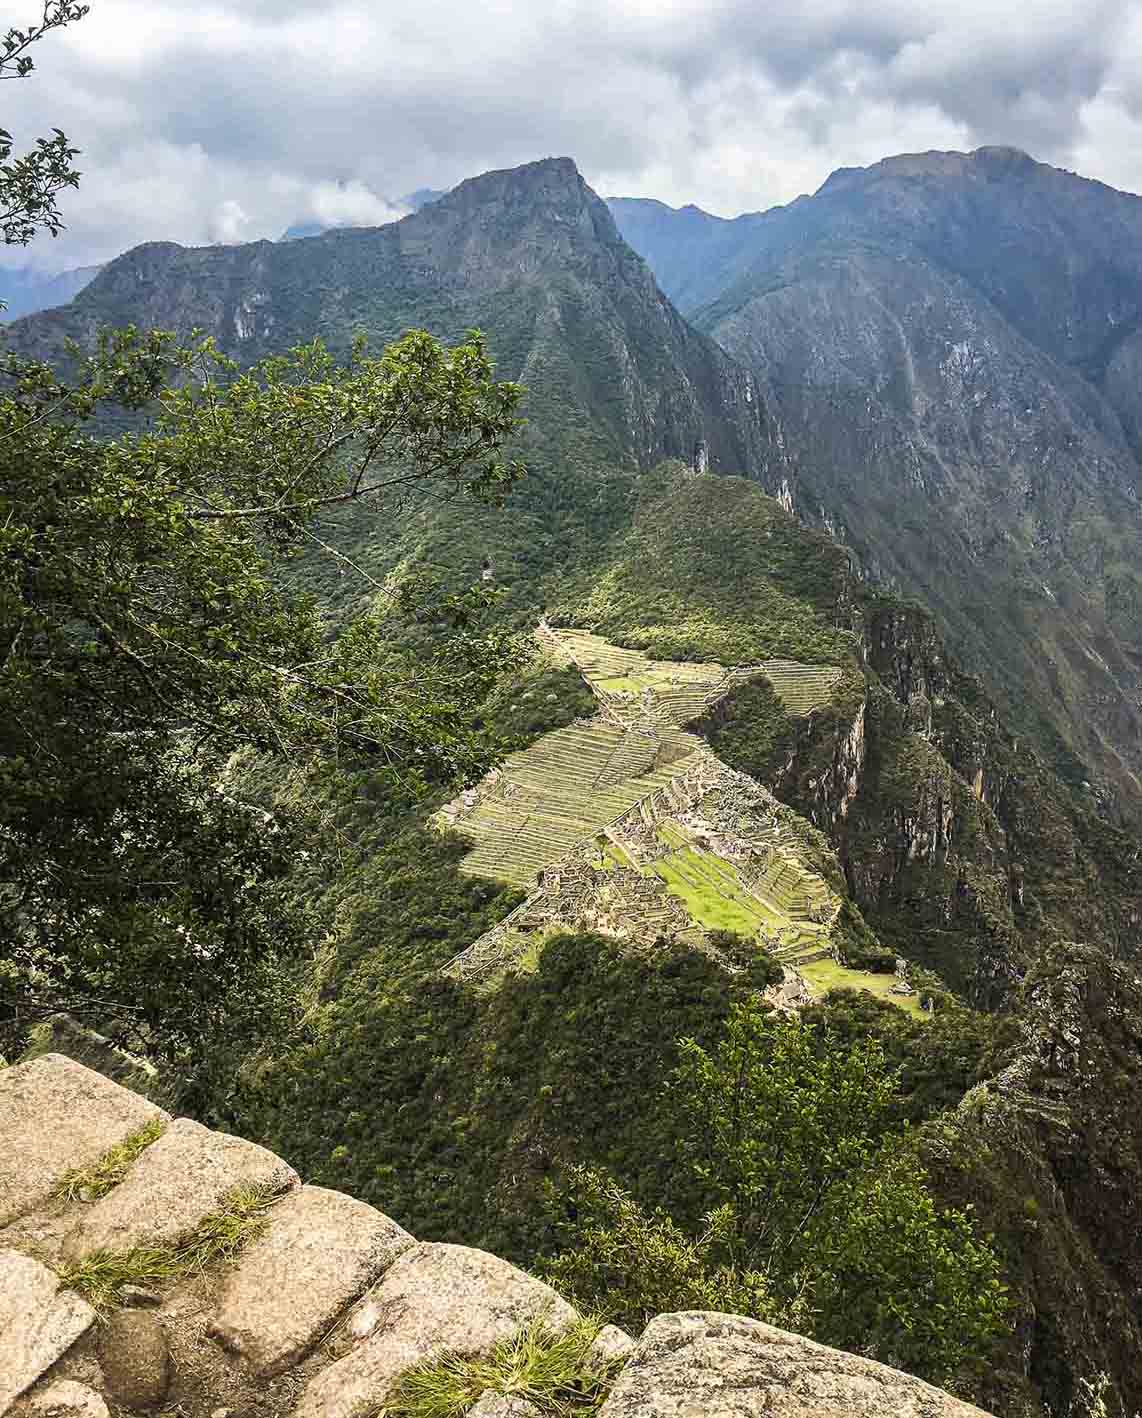 The tall mountain of Machu Picchu as seen from the Huayna Picchu summit on a cloudy day.